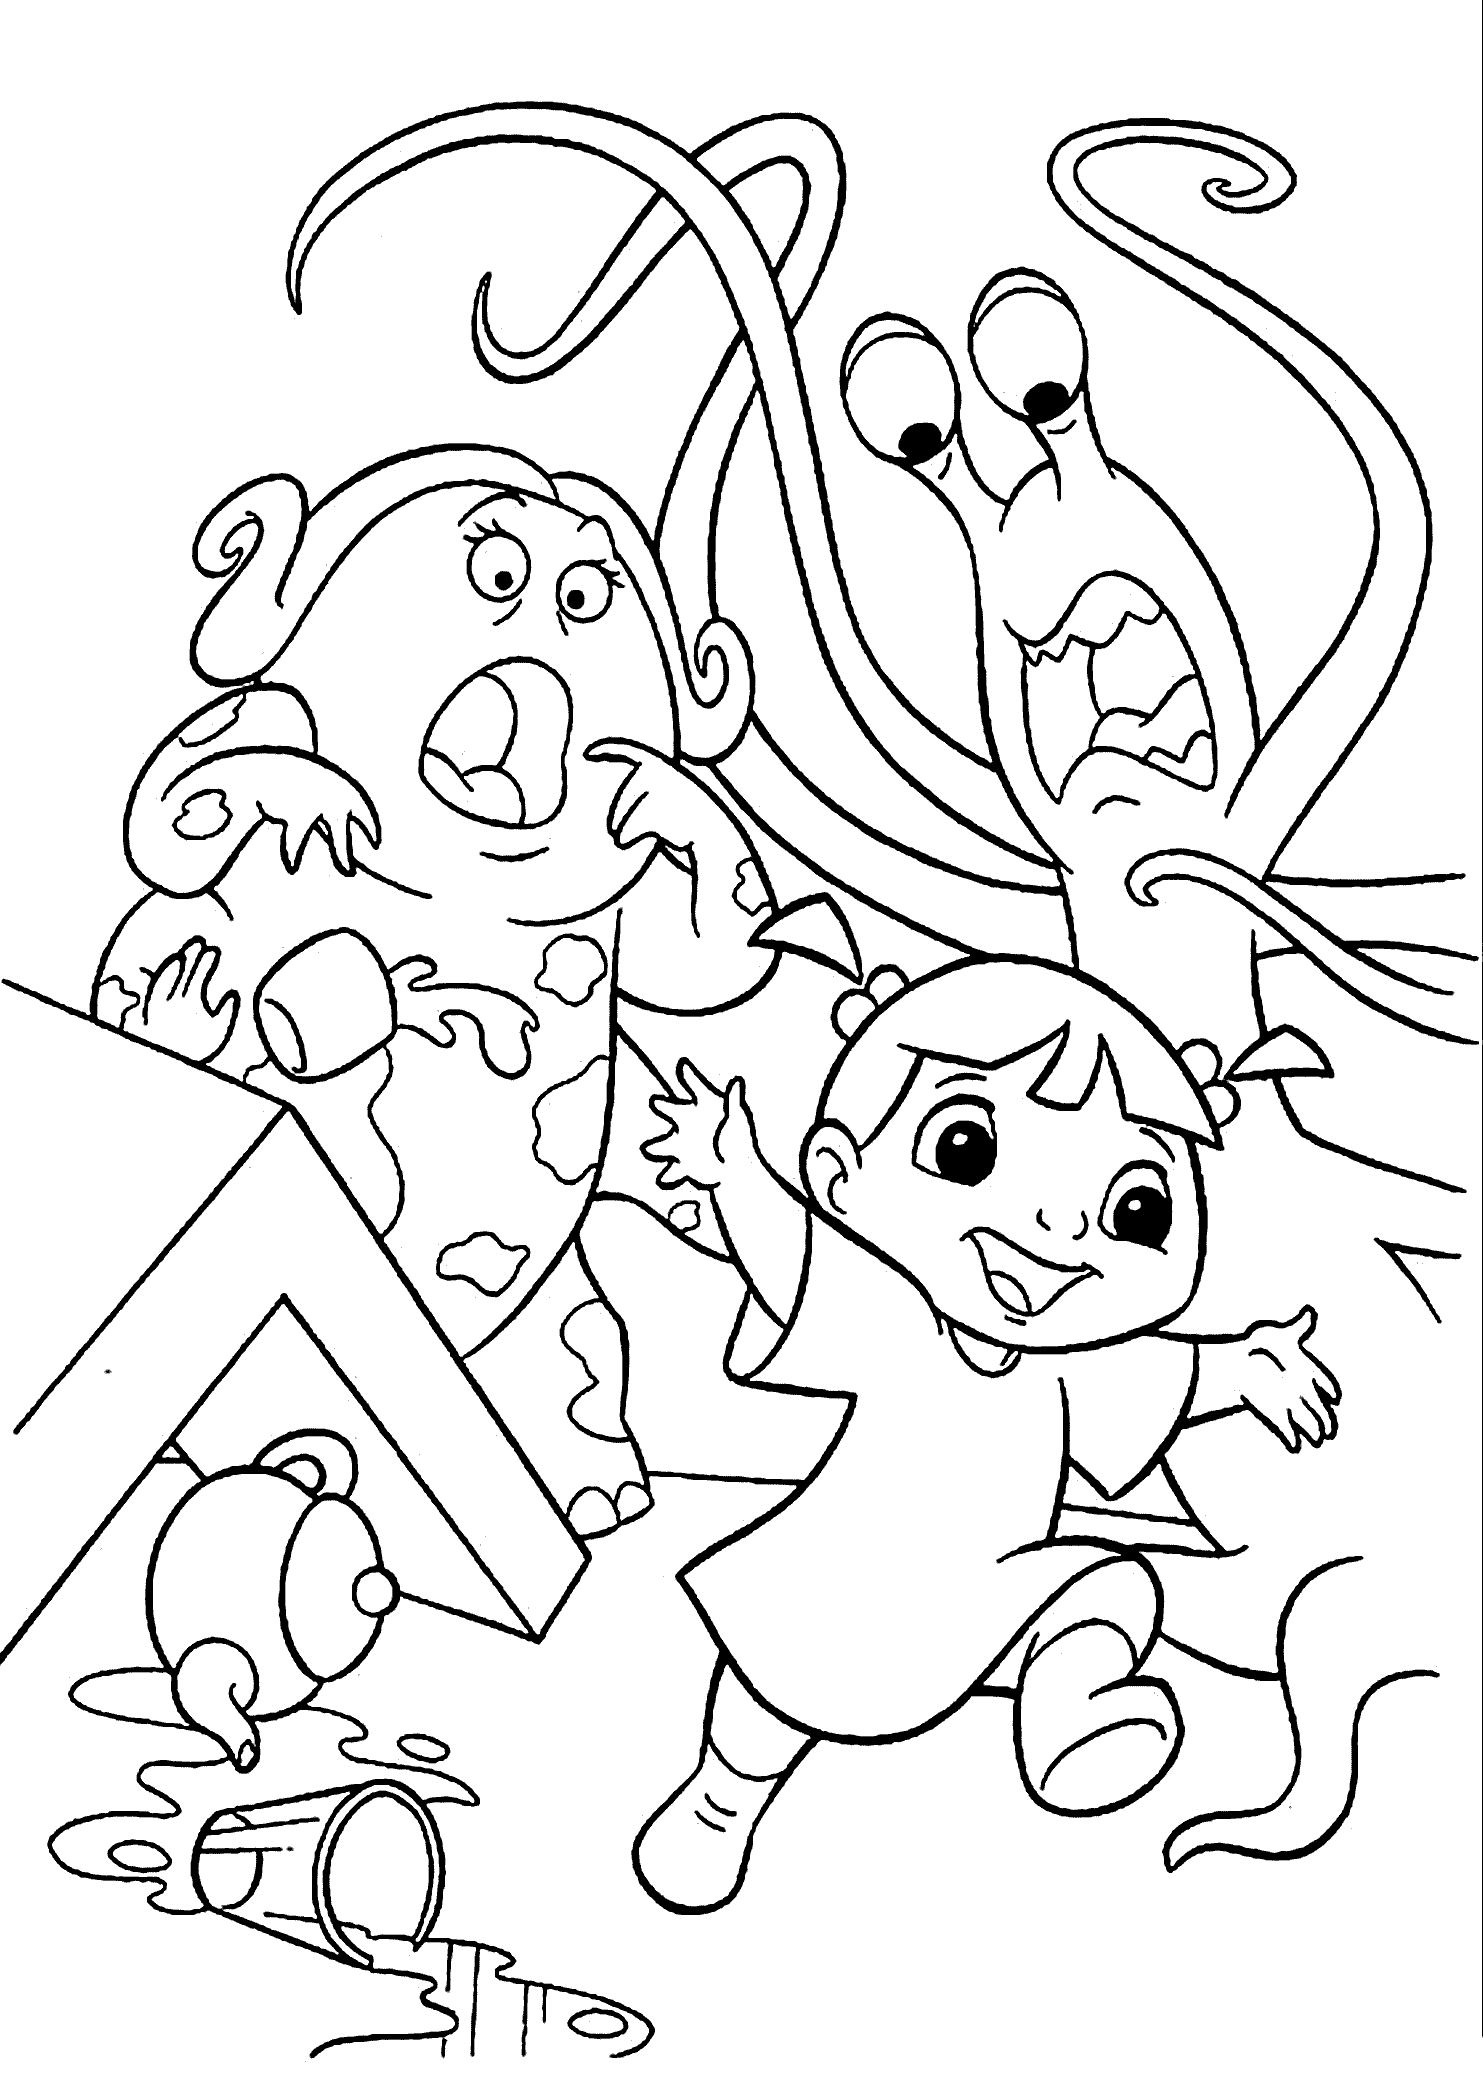 Free Printable Monster Inc Coloring Pages Pdf - Monsters Inc Coloring Pages